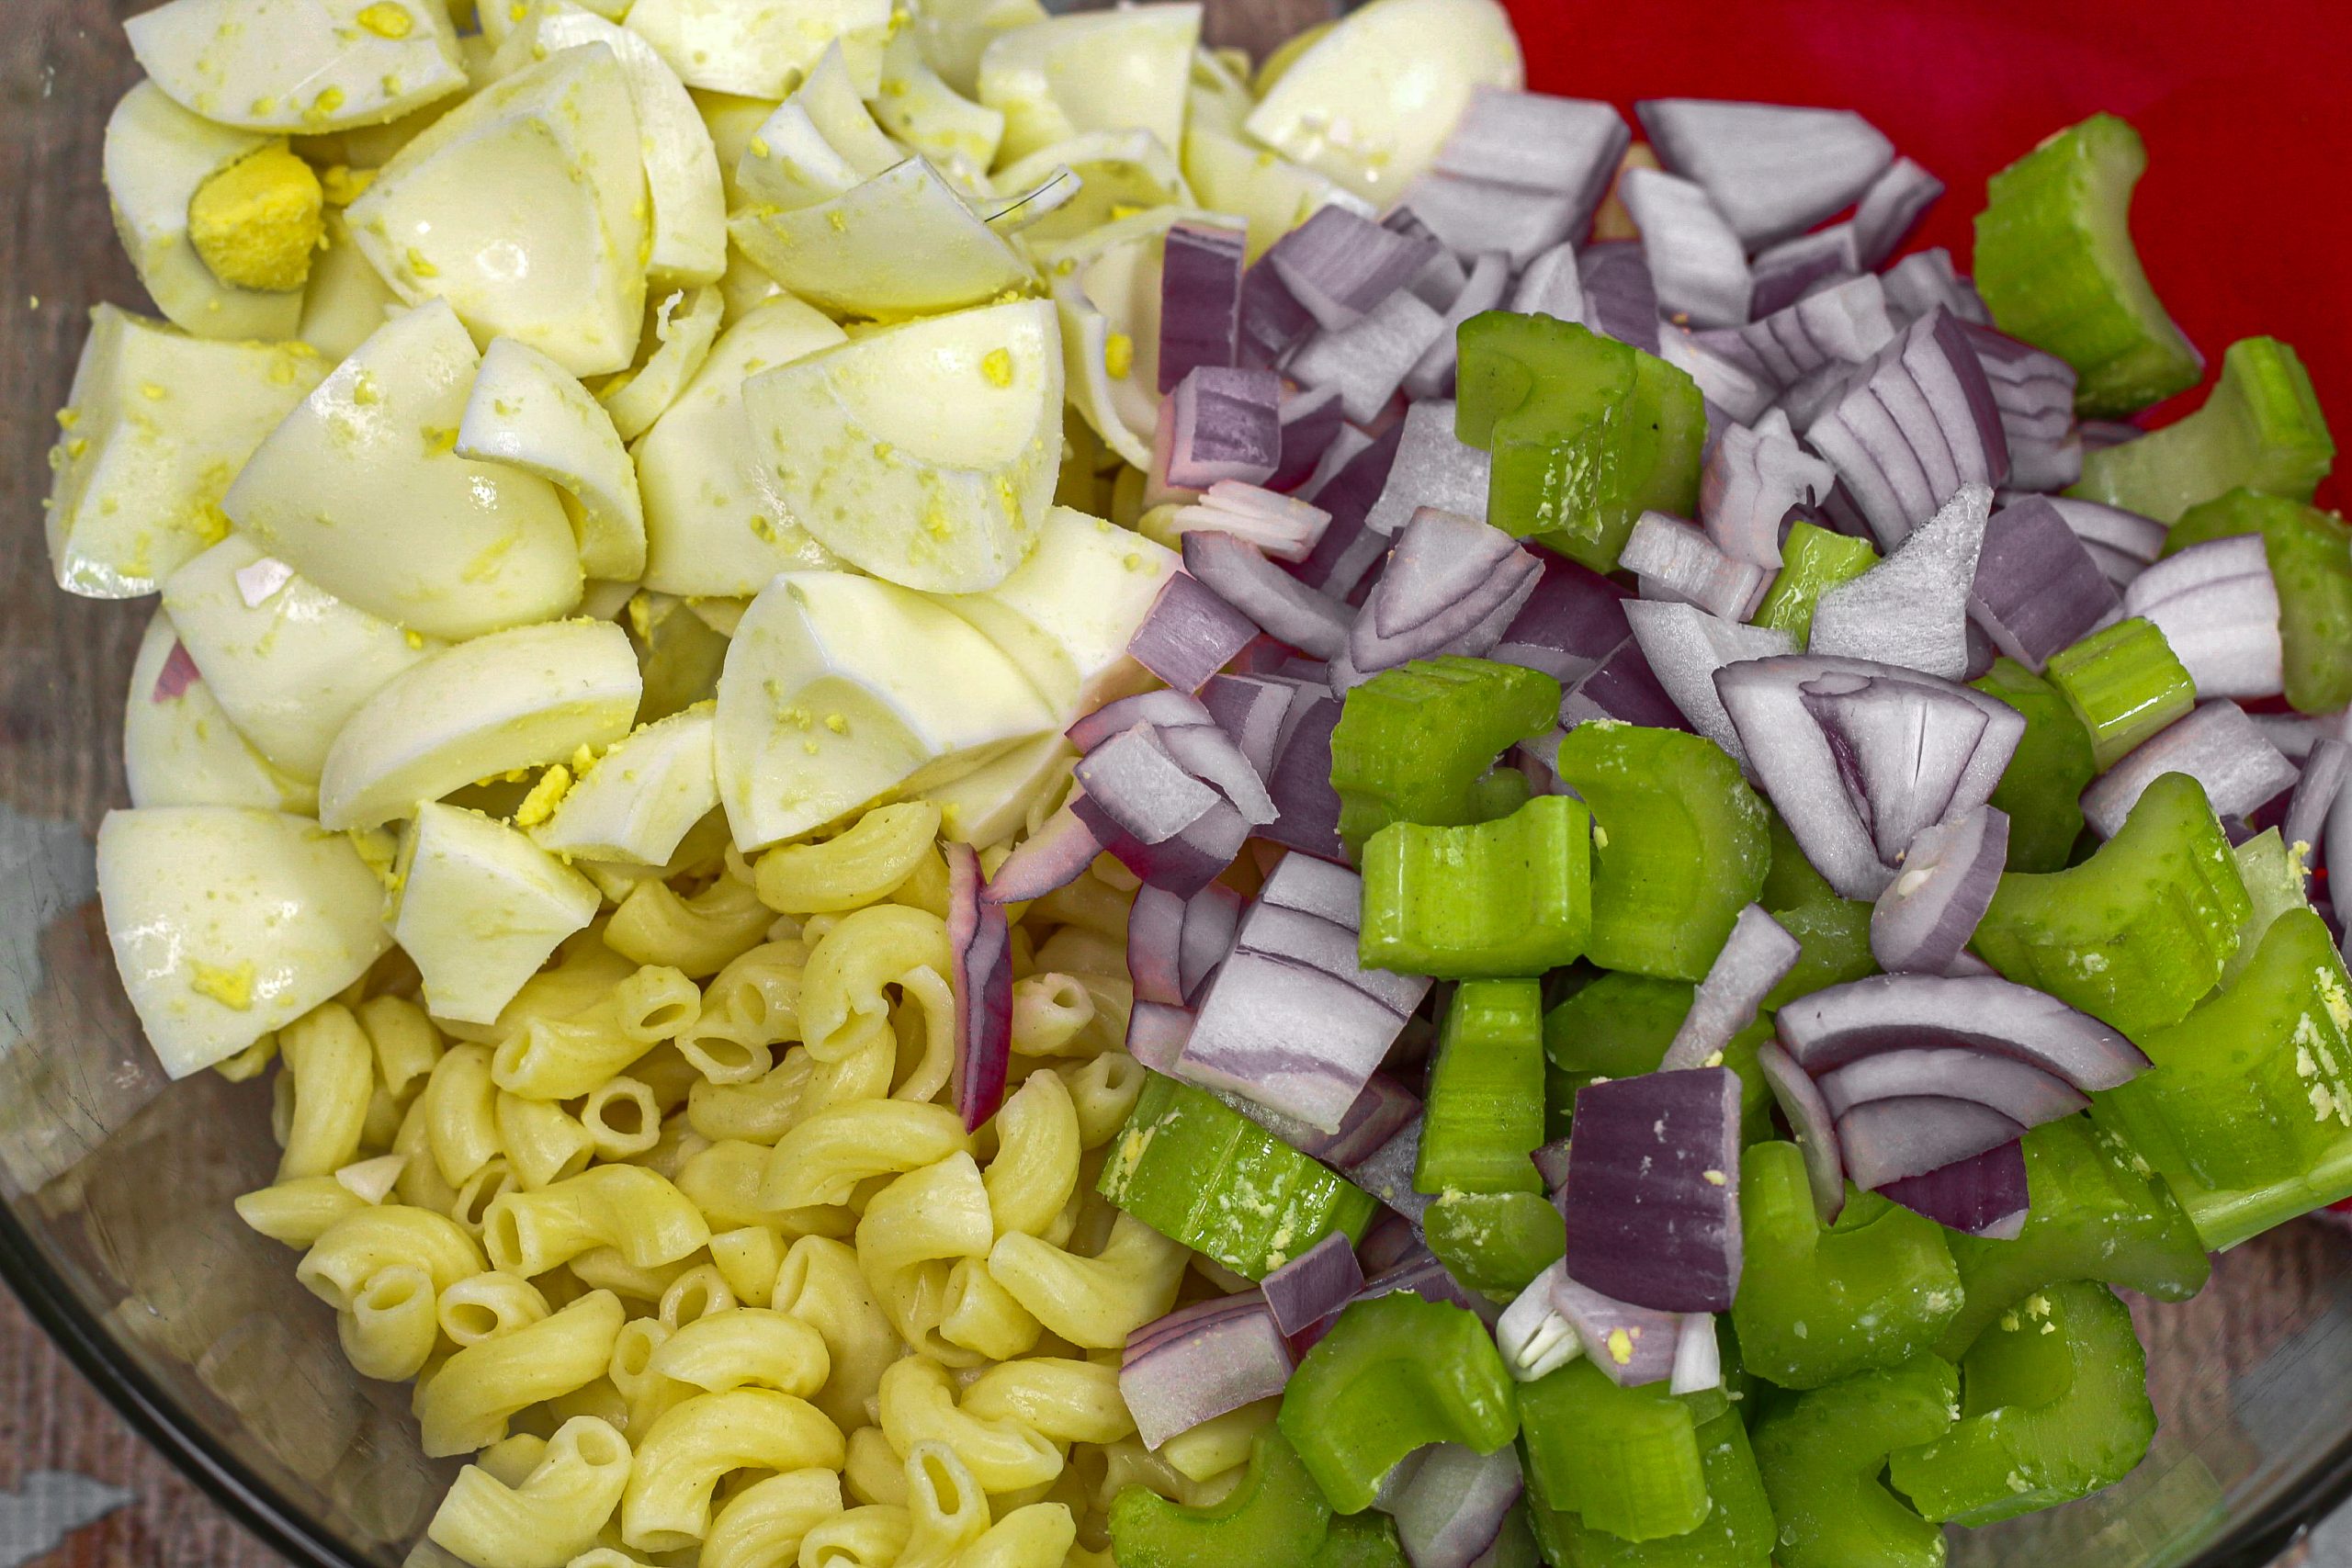 Add the chopped onion and celery to the pasta bowl.